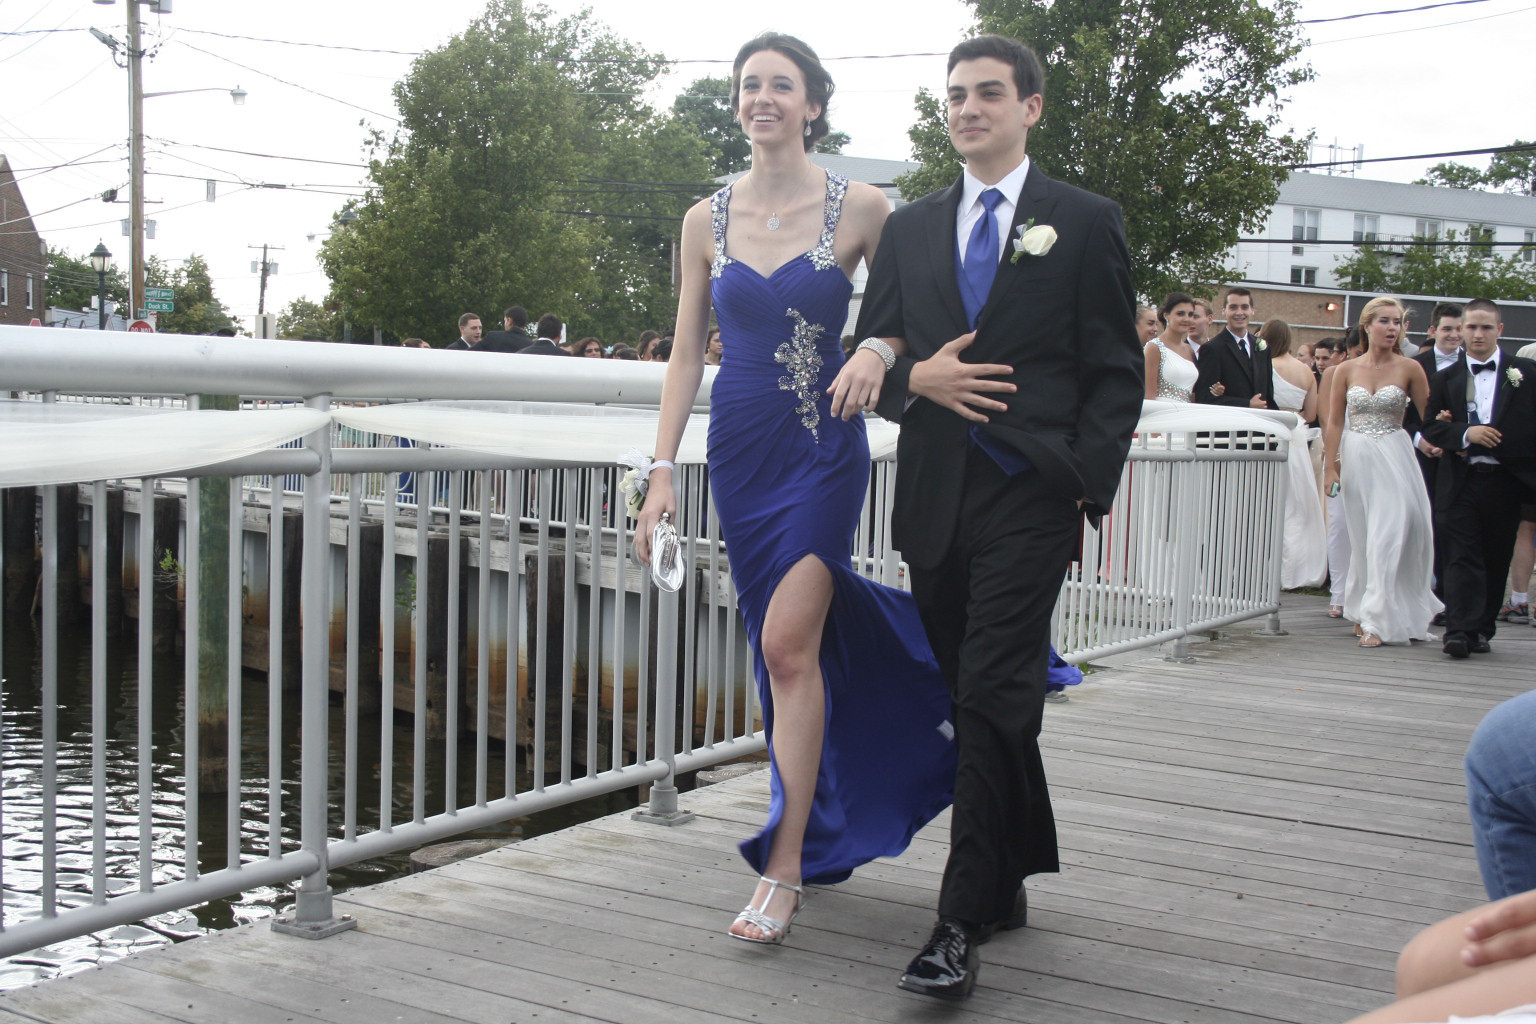 Alexis Jackson and John Glickman strolled down the pier together.